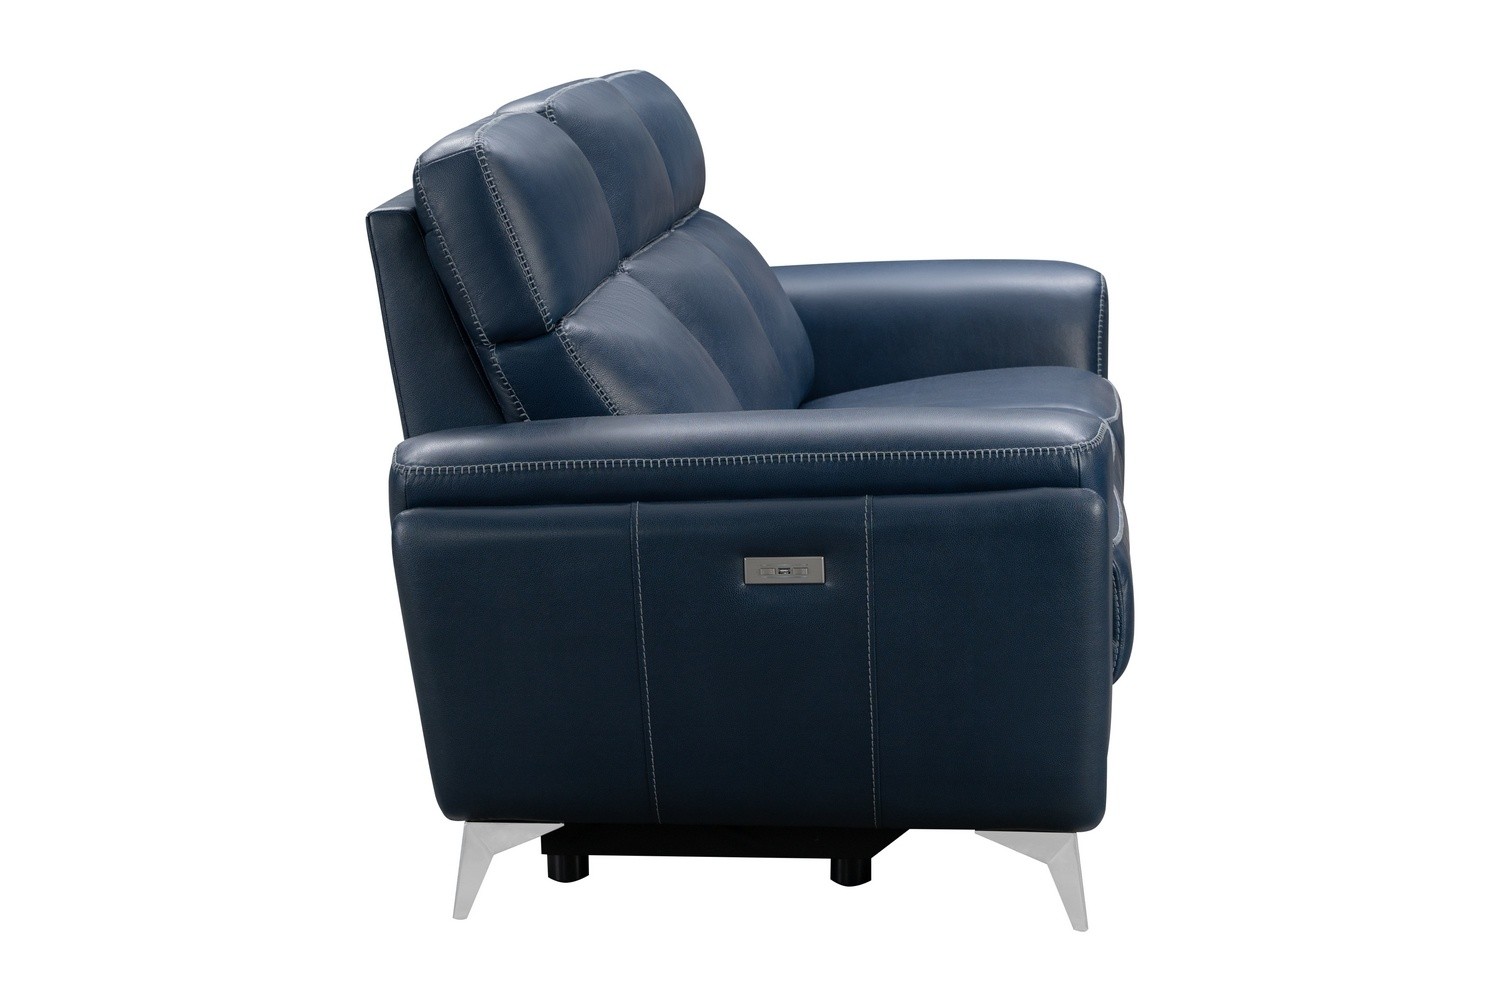 Barcalounger Cameron Power Reclining Sofa with Power Head Rests - Marco Navy Blue/Leather Match